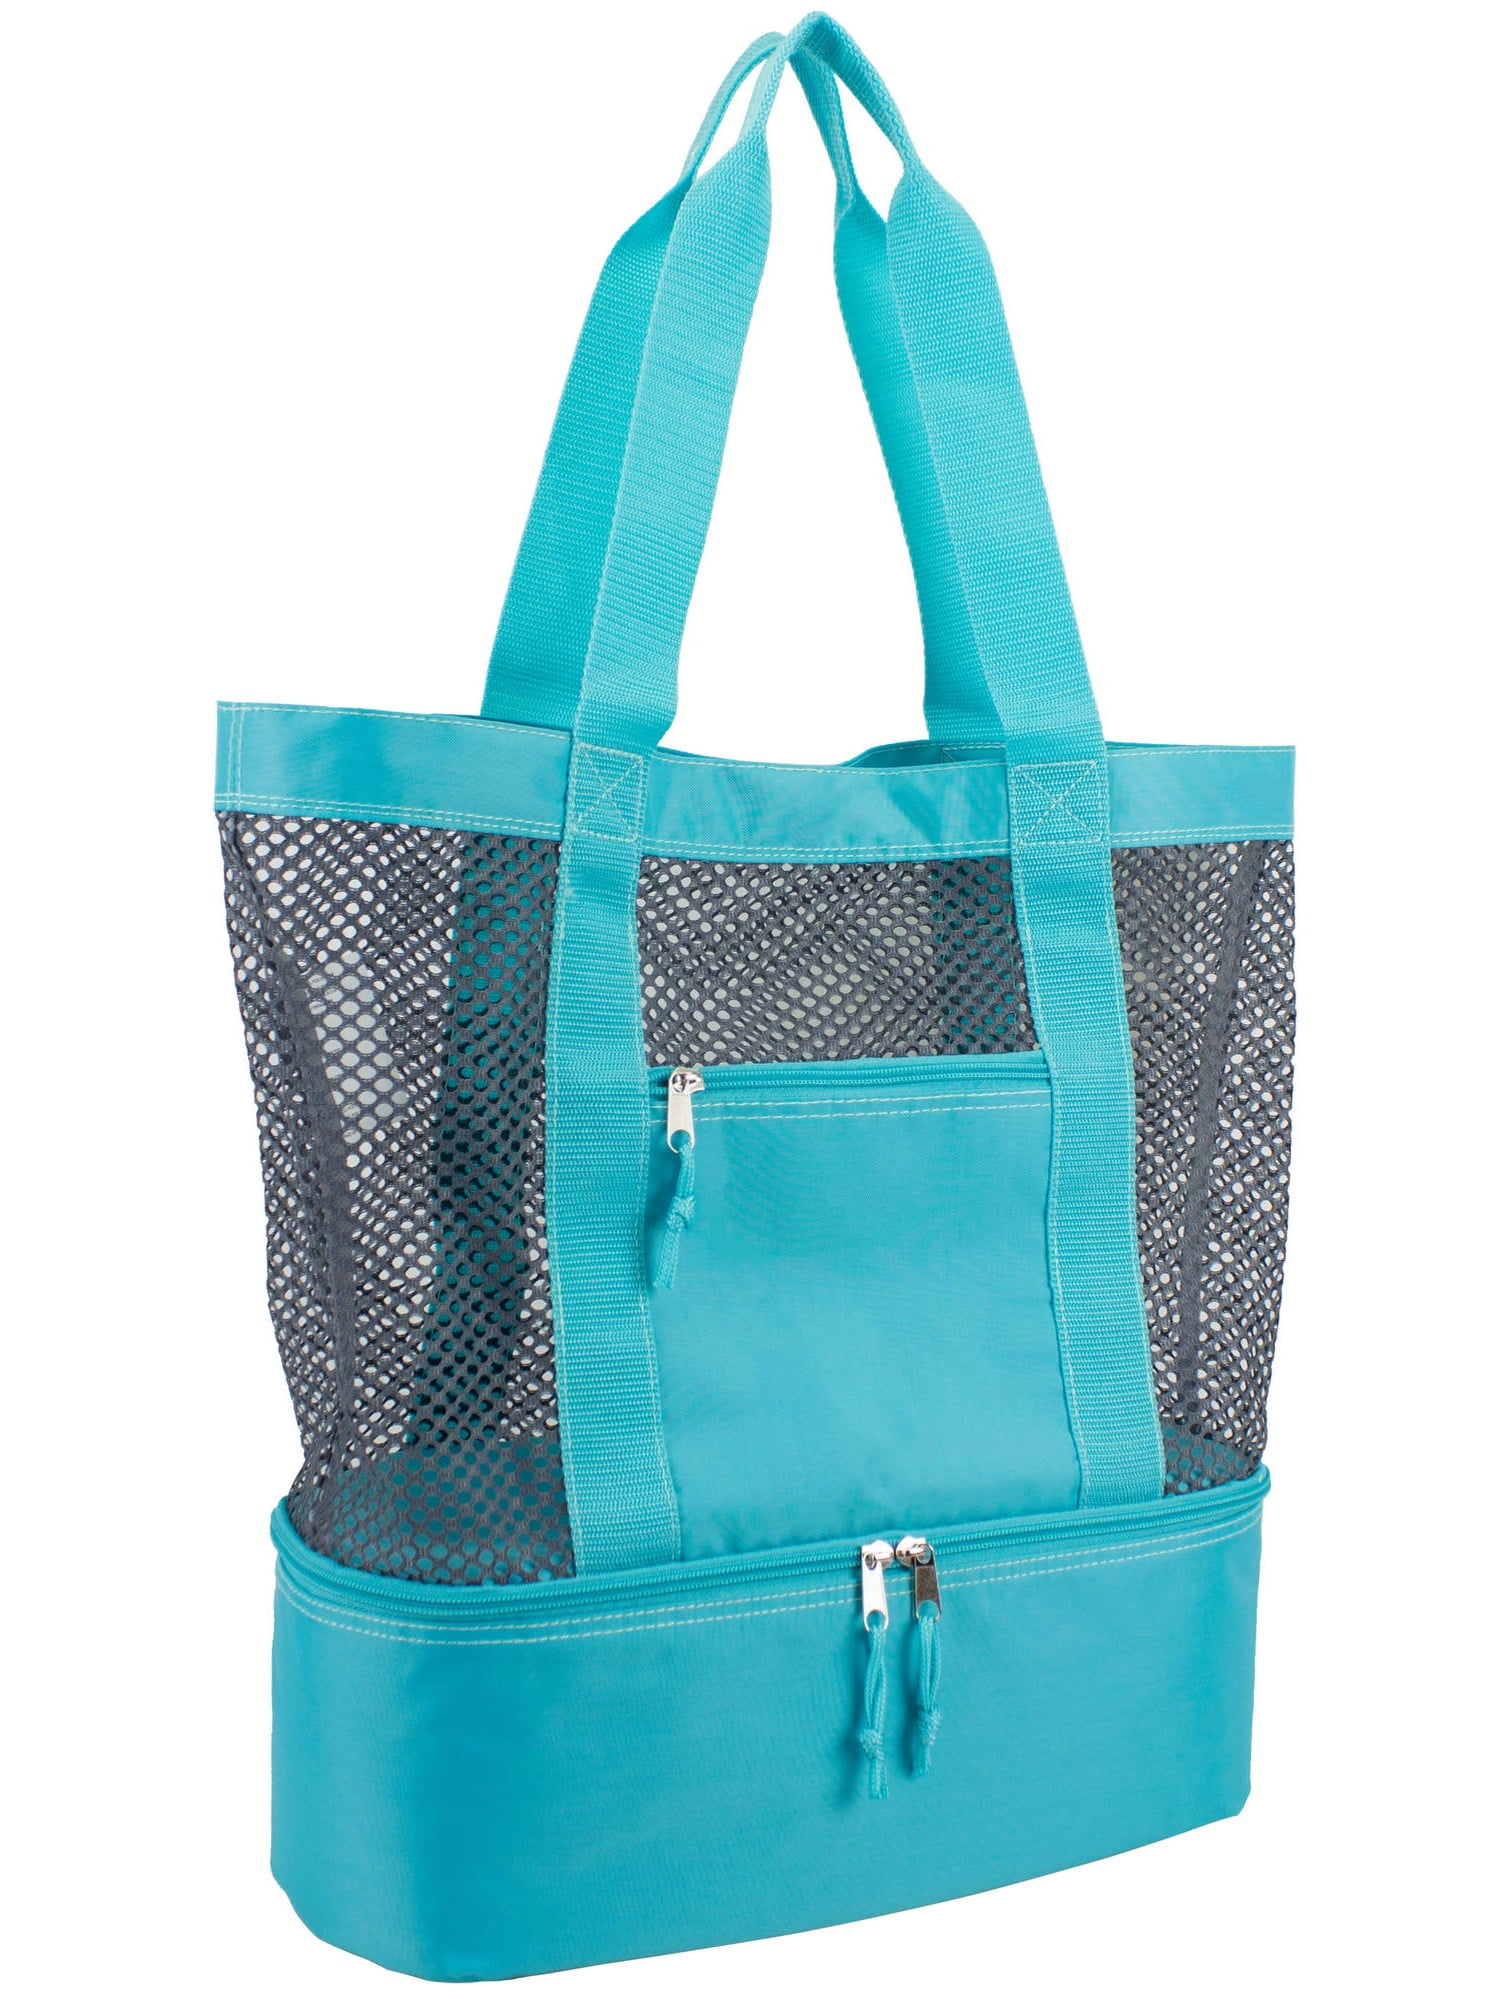 Solid color Picnic Bag Tote Woman Lnsulated Bags Casual Ladies